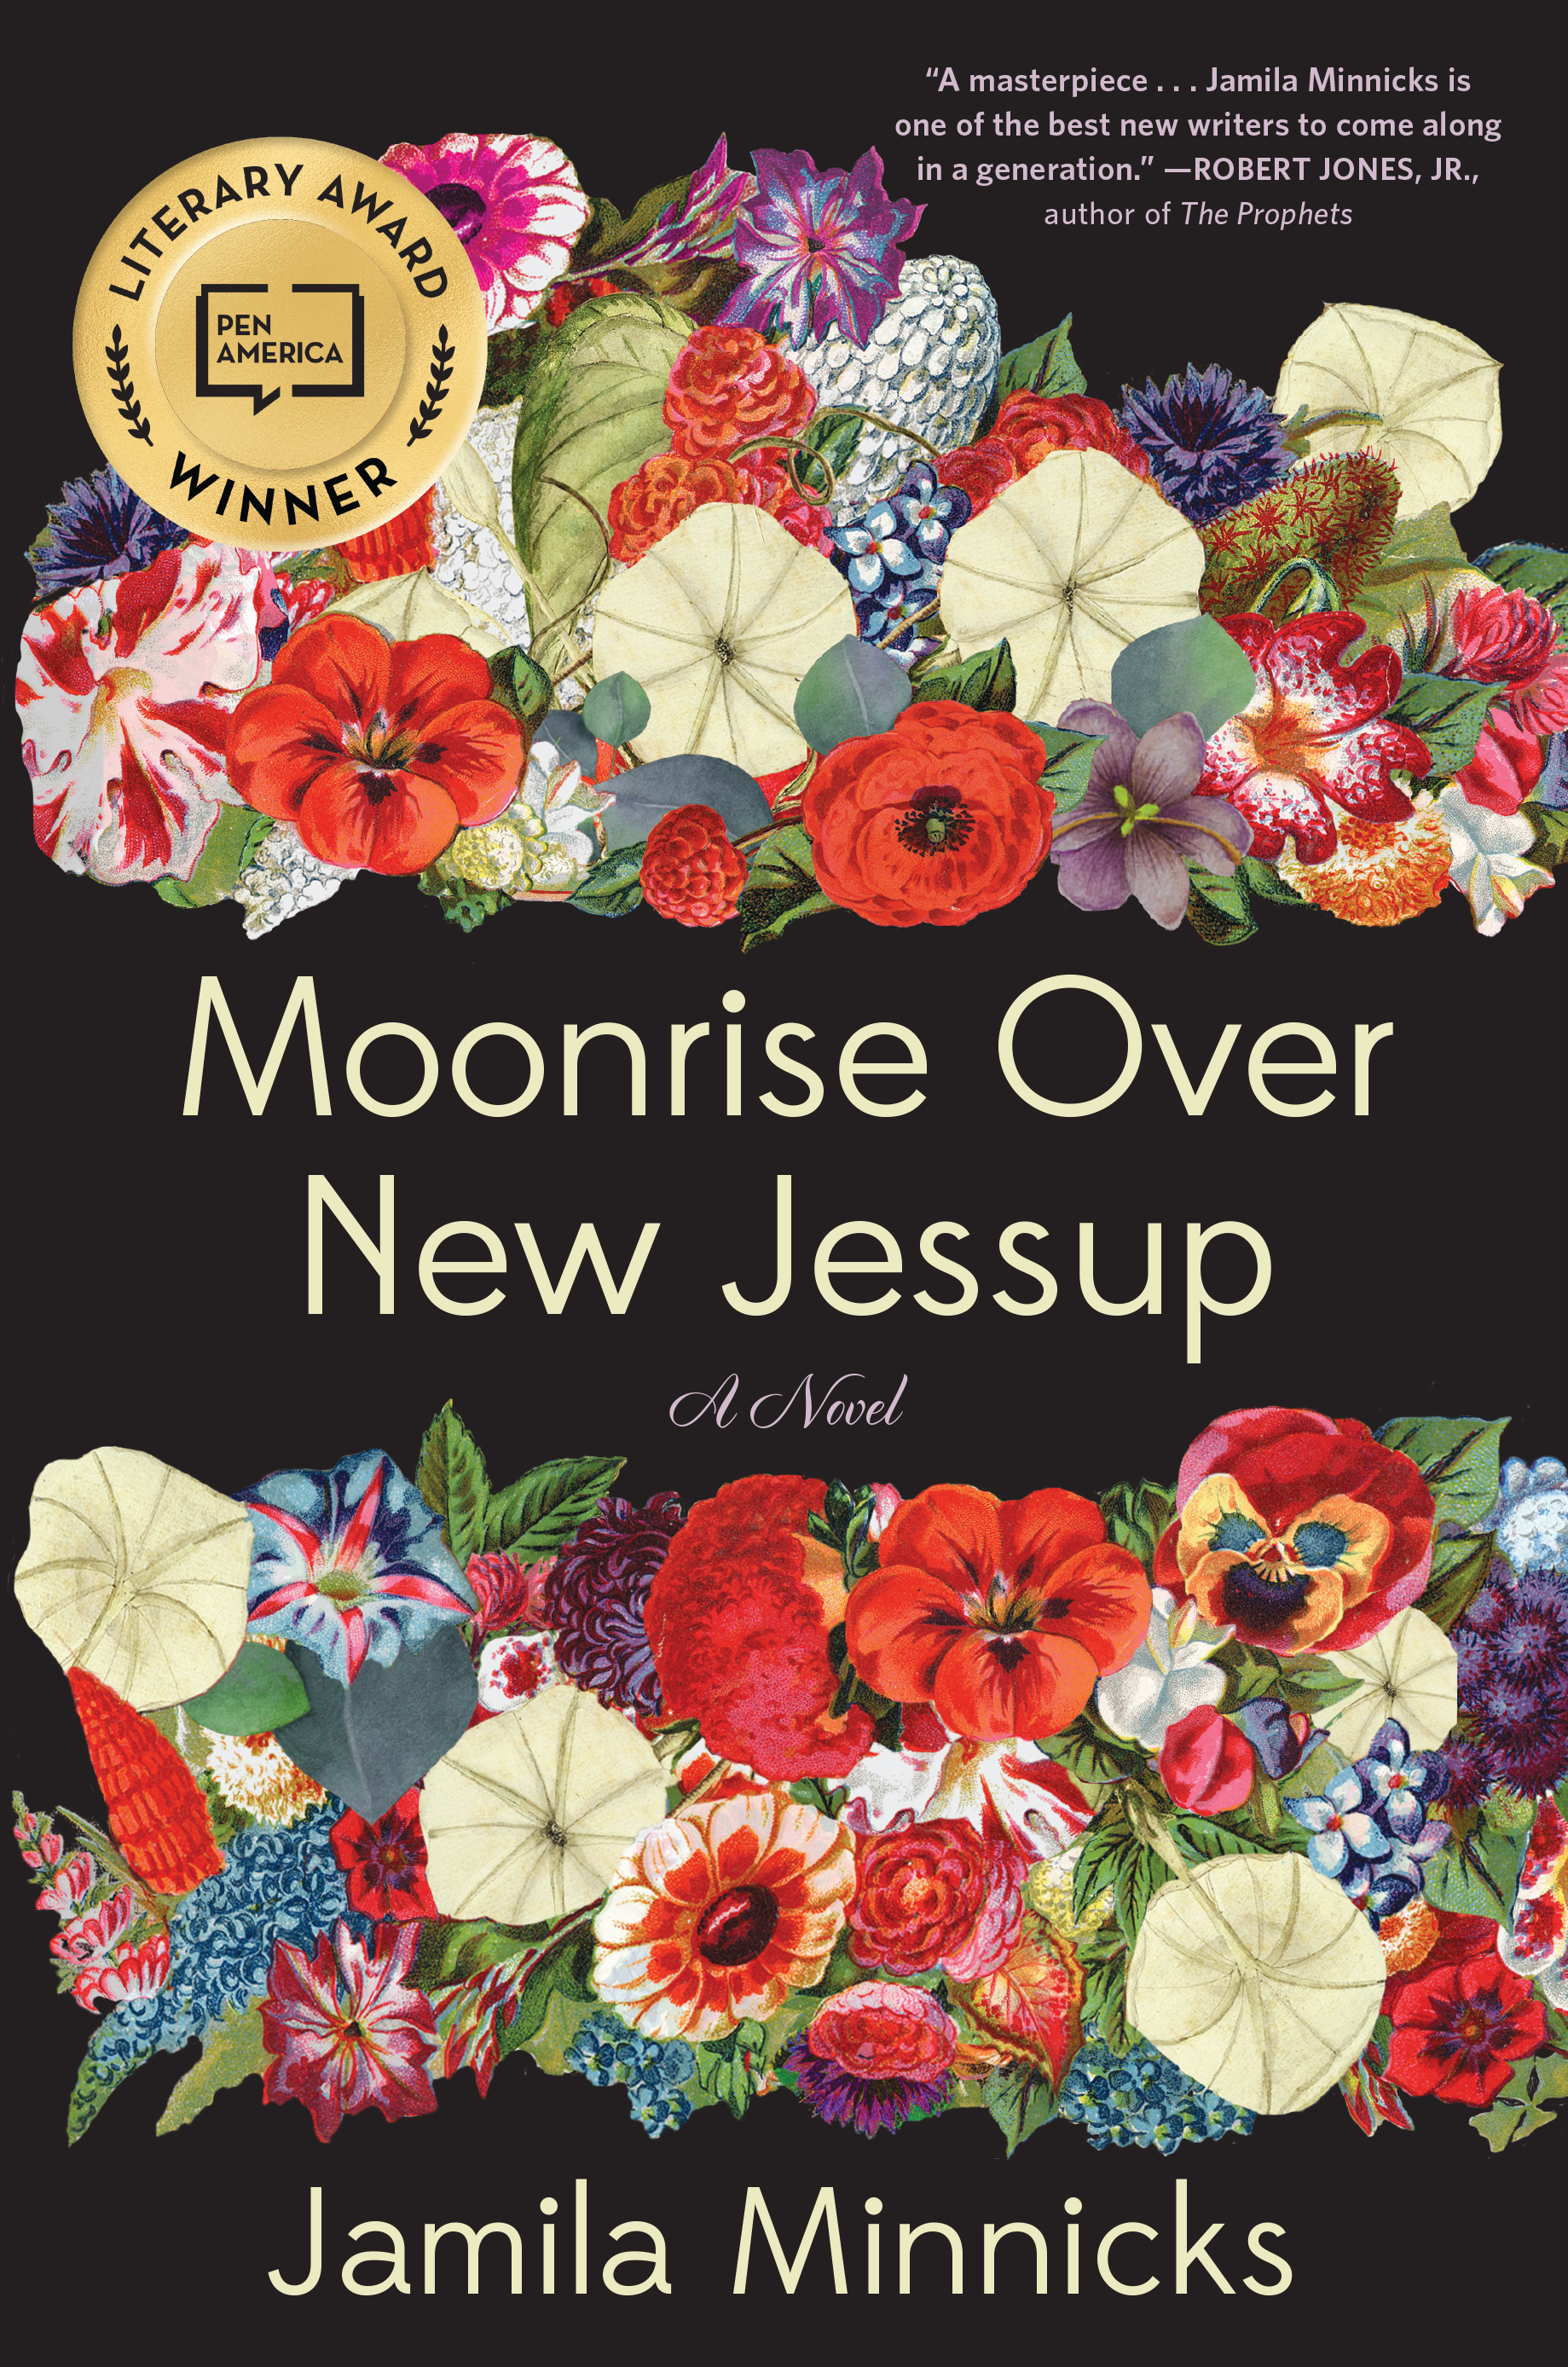 Moonrise Over New Jessup by Jamila Minnicks | Hachette Book Group